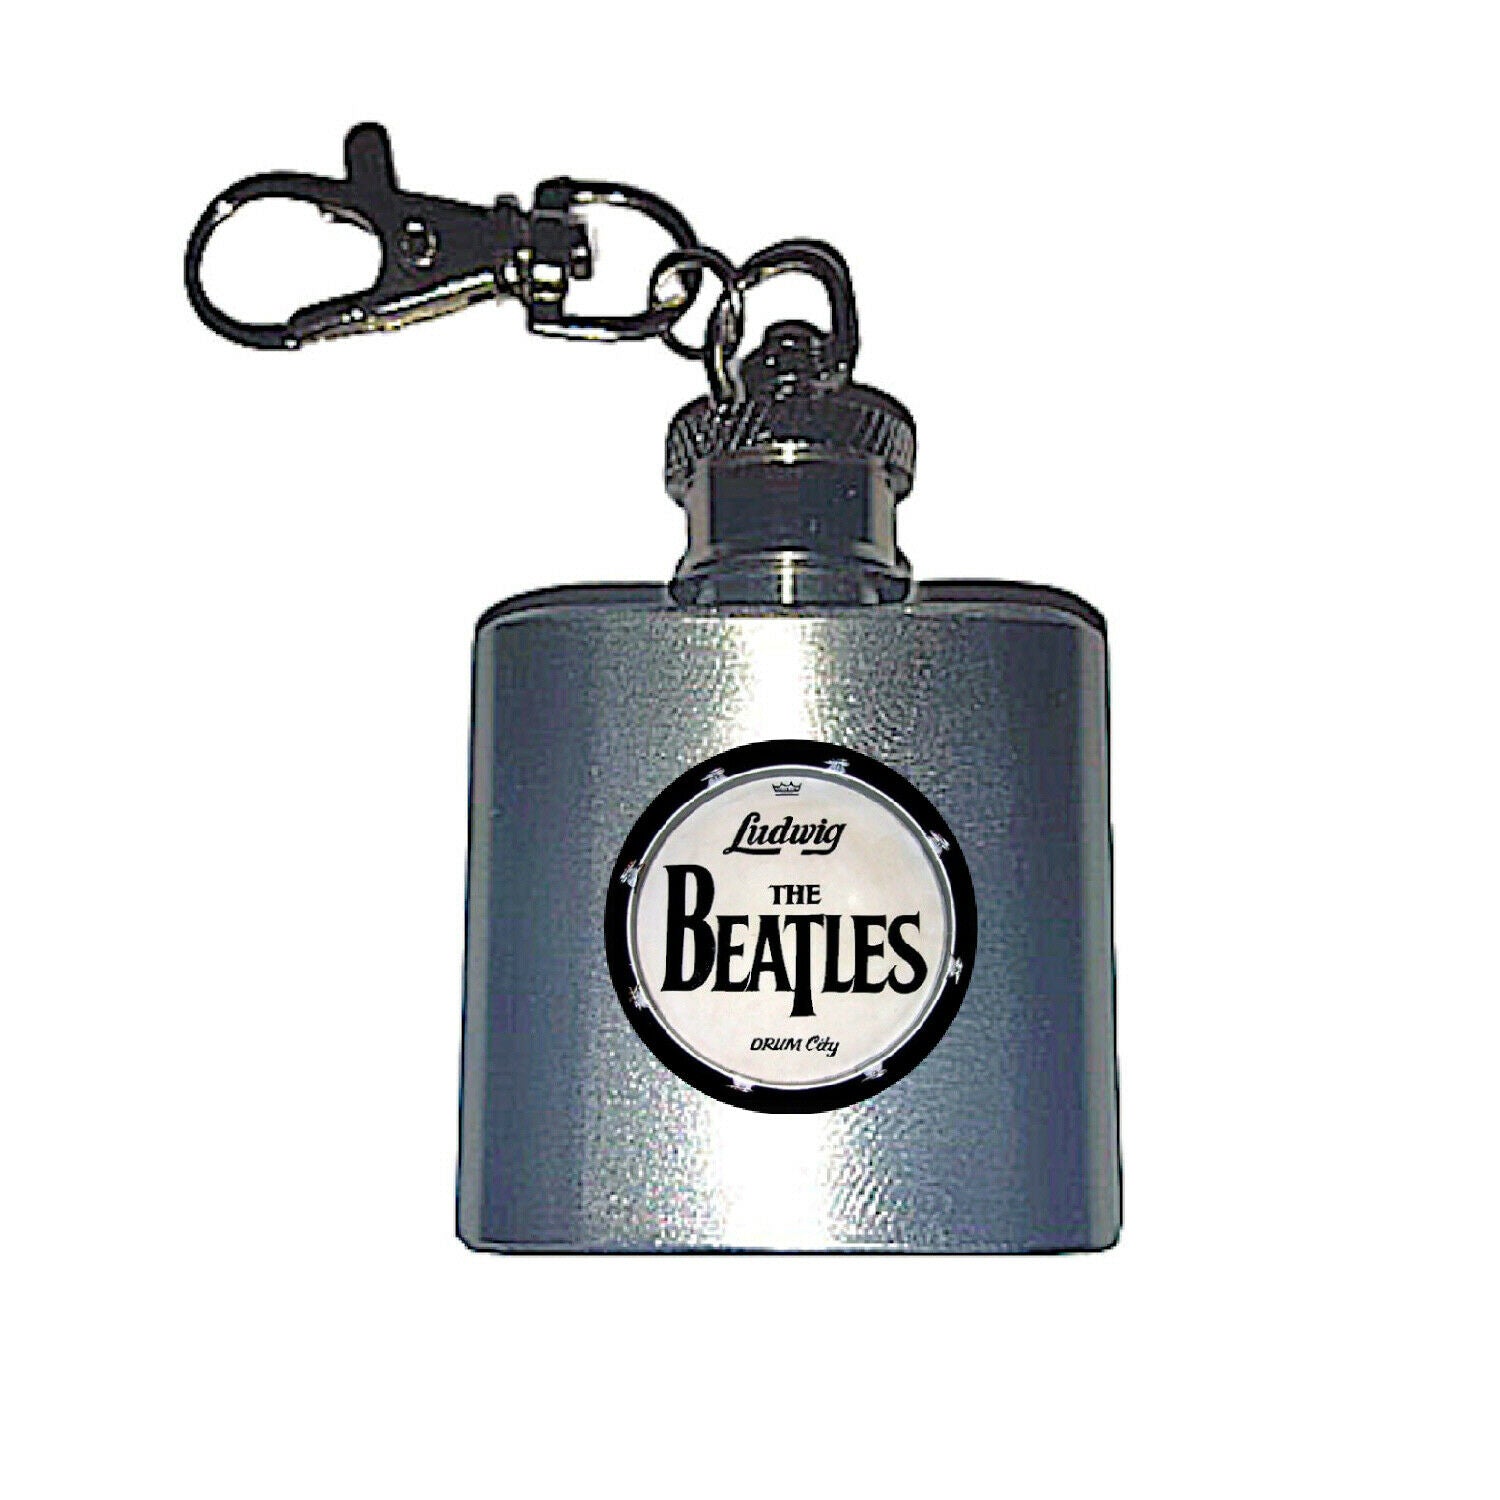 The Beatles Drum Flask Stainless Steel Mini keyring Keychain 1 ounce.